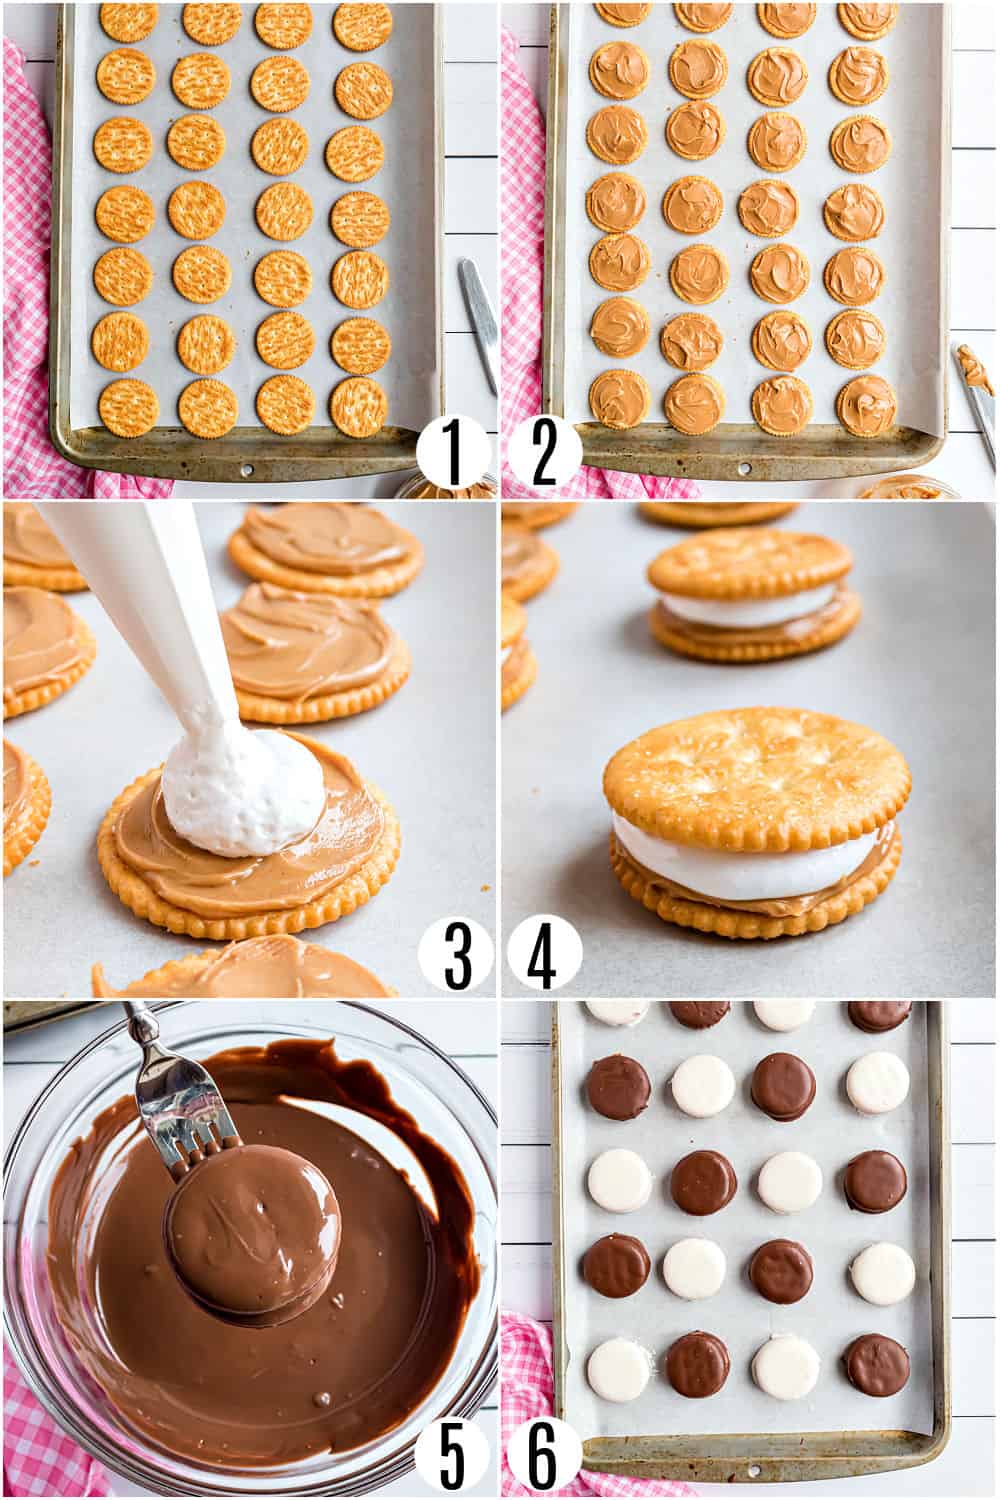 Step by step photos showing how to make chocolate covered ritz.